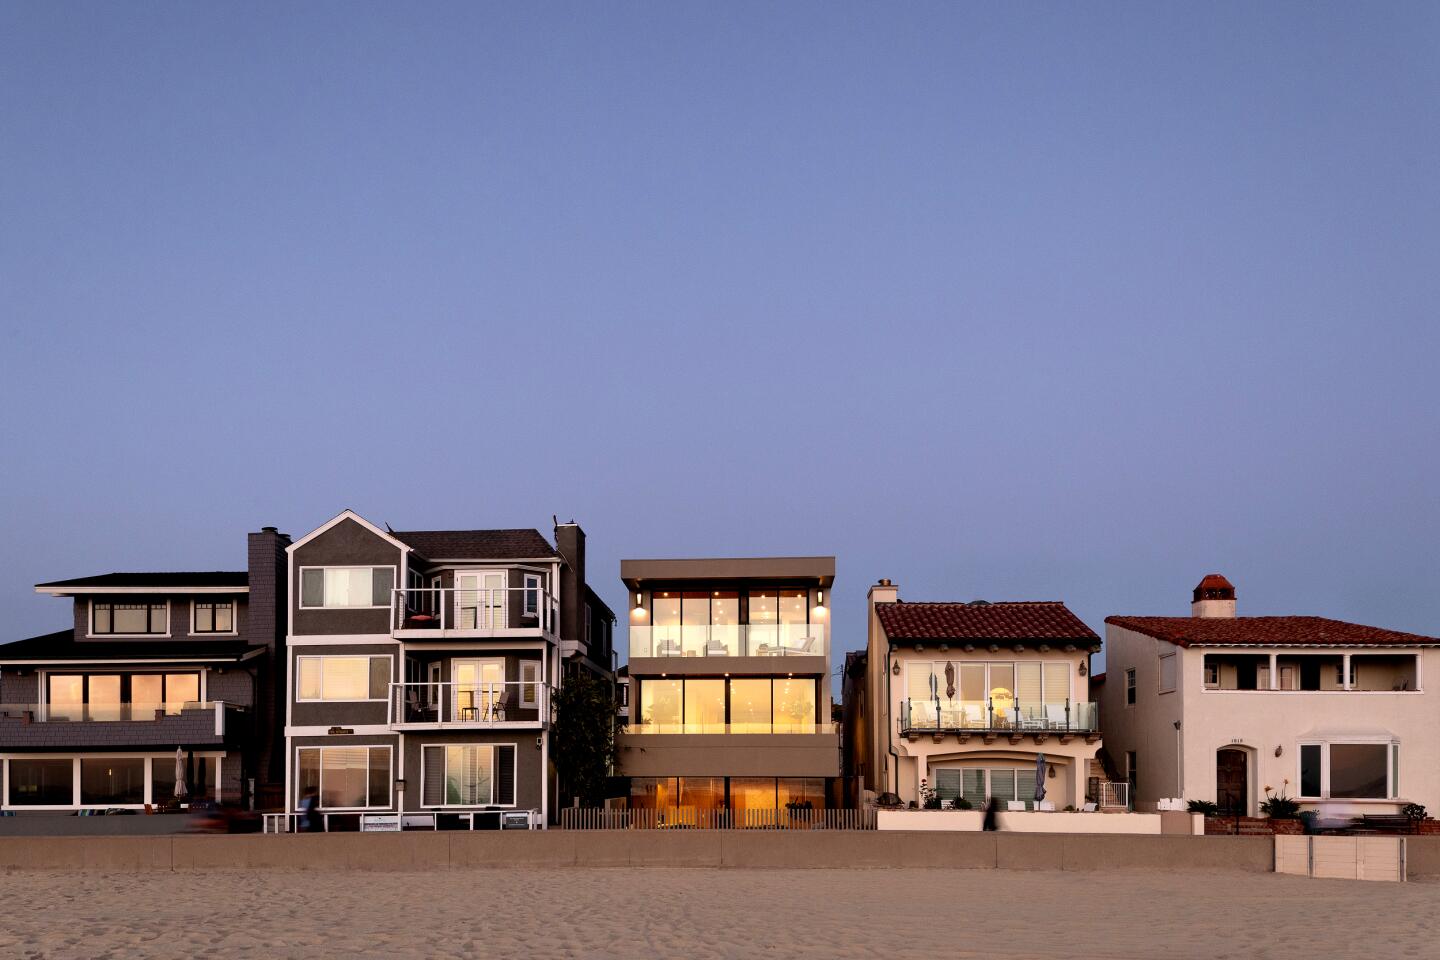 The three-story home takes advantage of the coastal setting with an indoor-outdoor living room and sunken courtyard next to the sand. Built in 2020, the modern beach house holds stylish living spaces with warm woods, stone accents and glass walls.